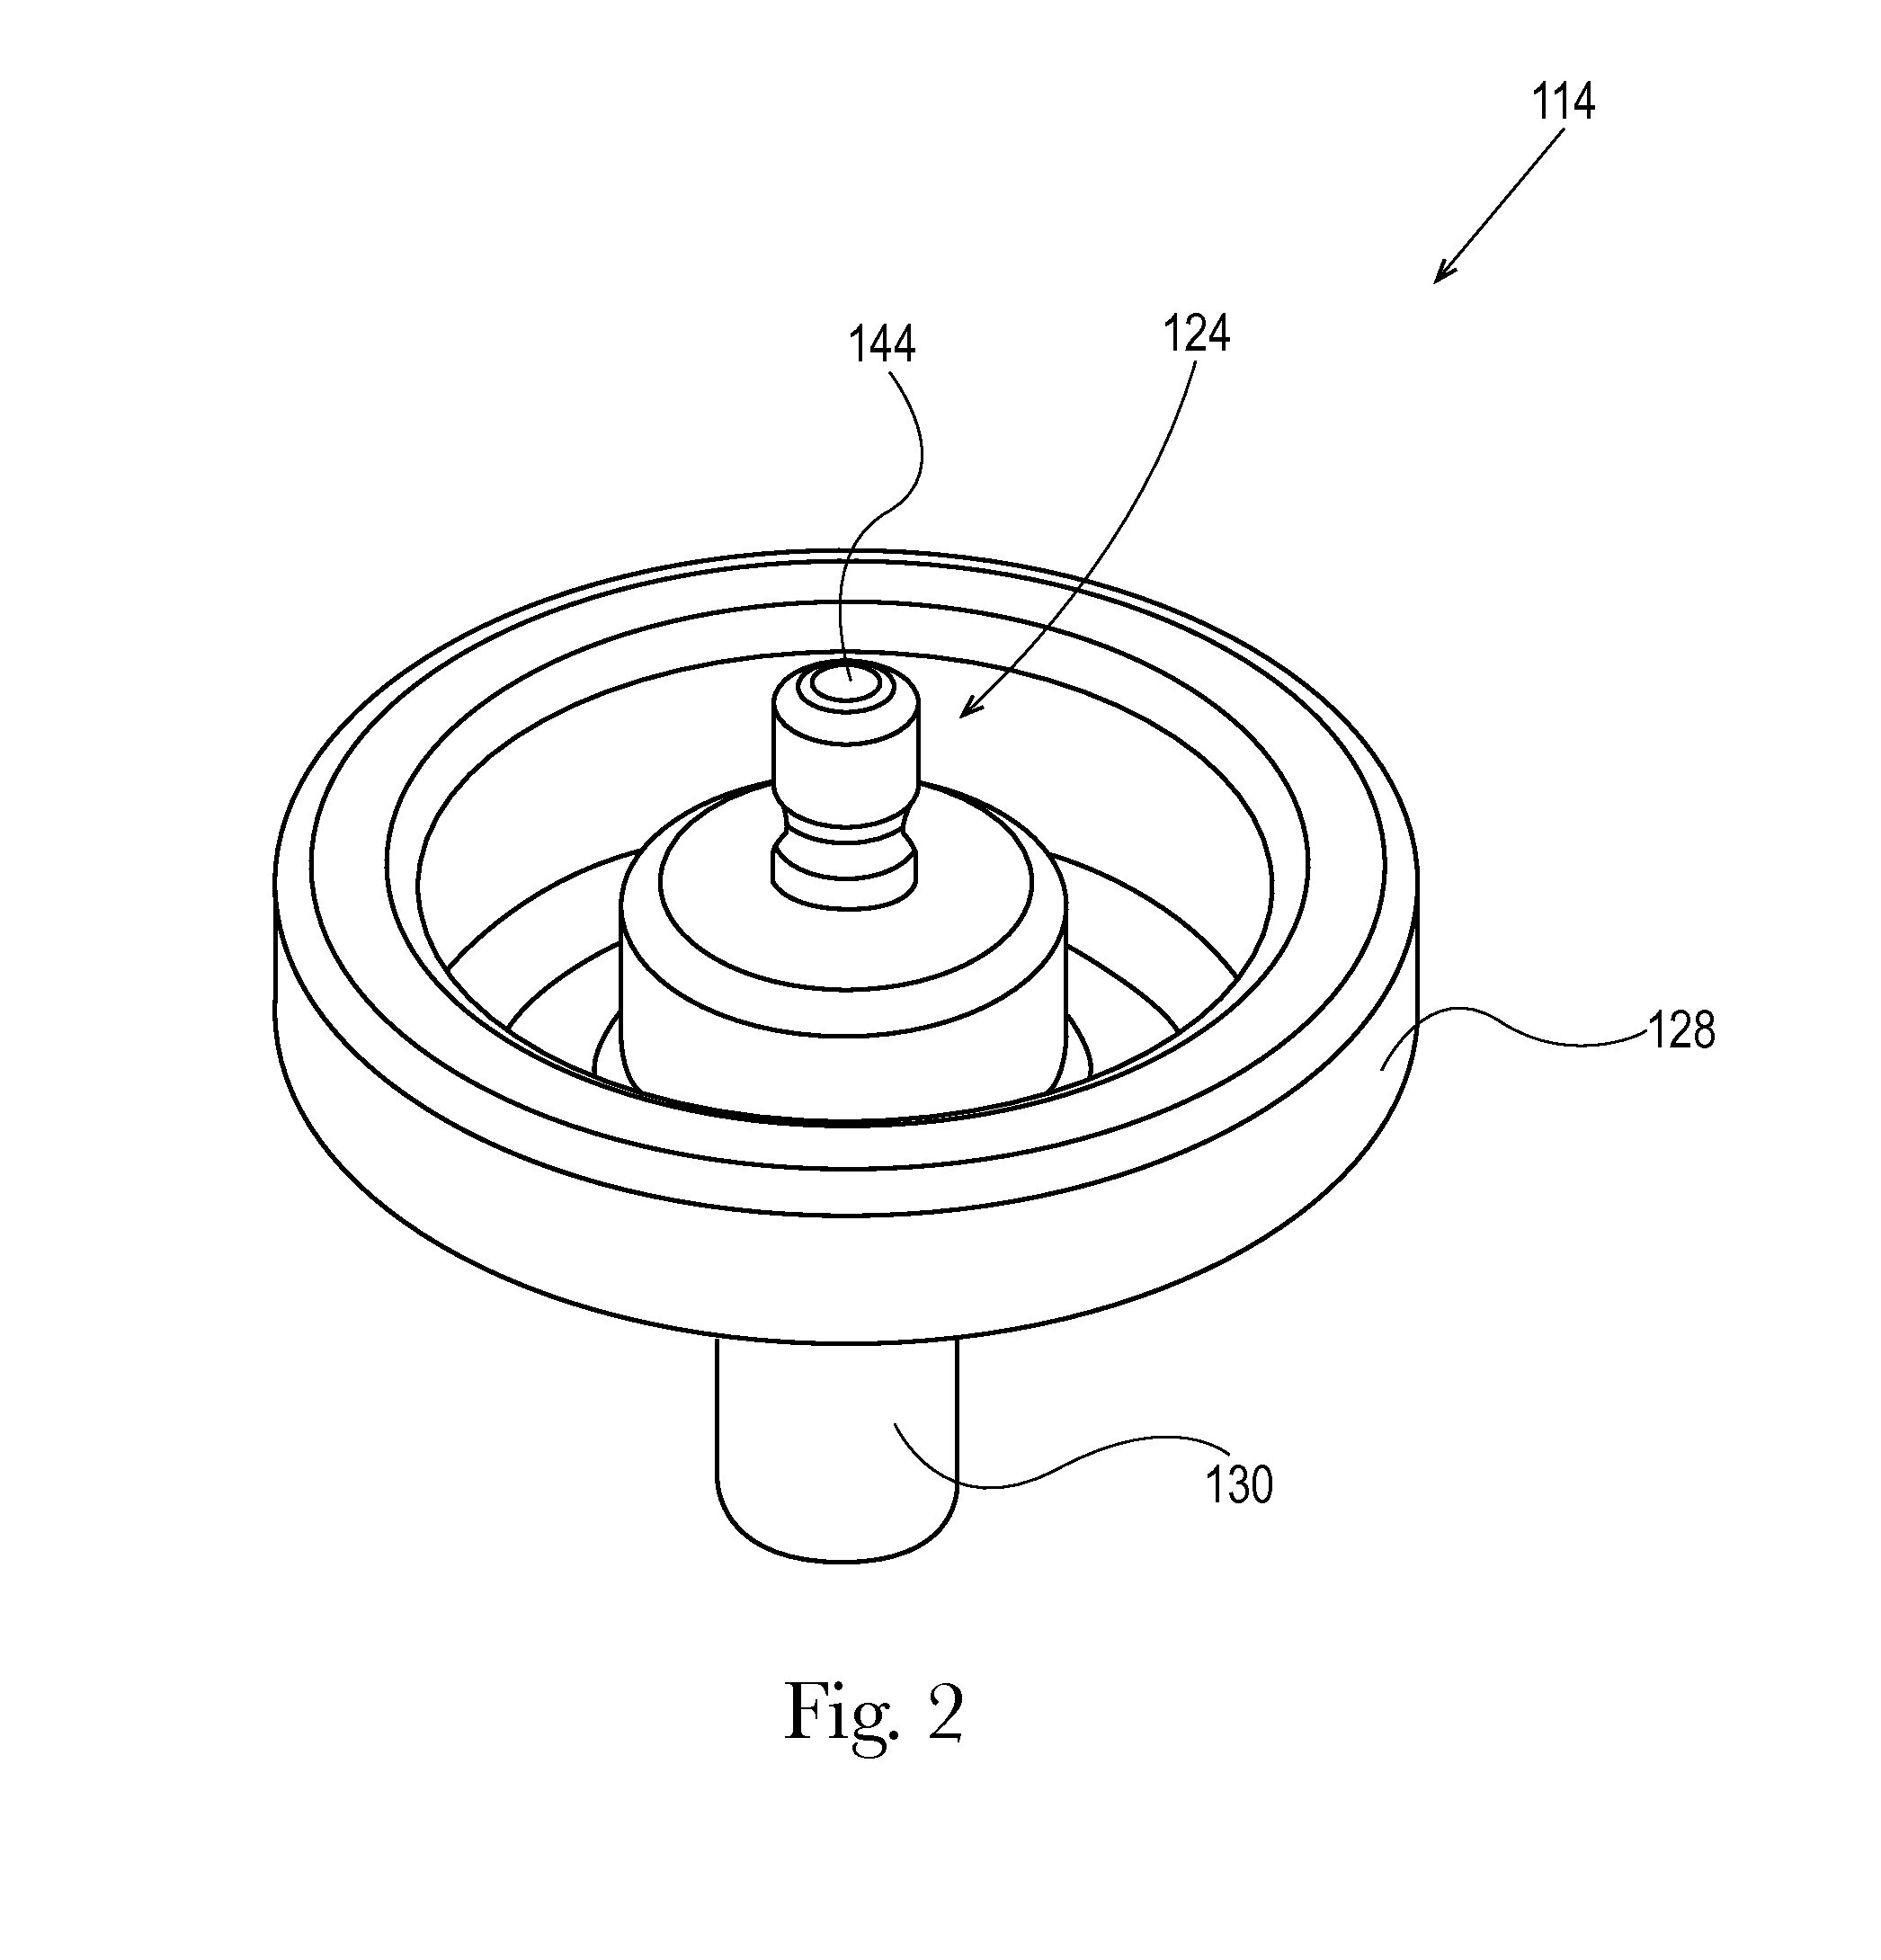 Aerosol Antiperspirant Compositions, Products and Methods